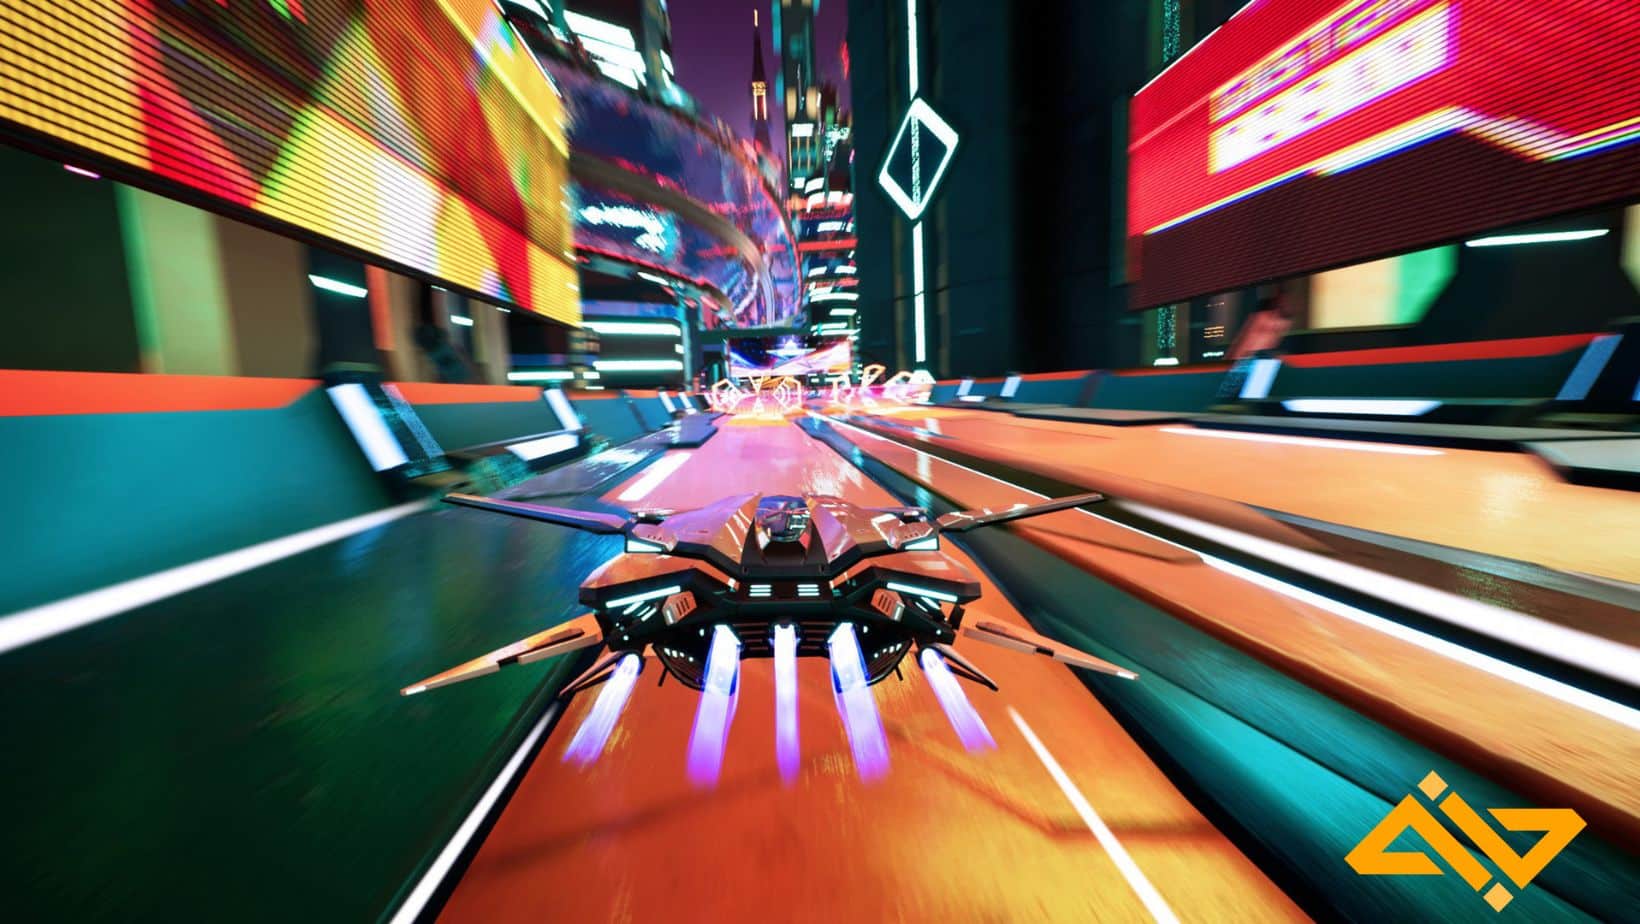 It is a tribute to classic arcade racing games and features exhilarating futuristic races across an extensive single-player campaign and competitive multiplayer.